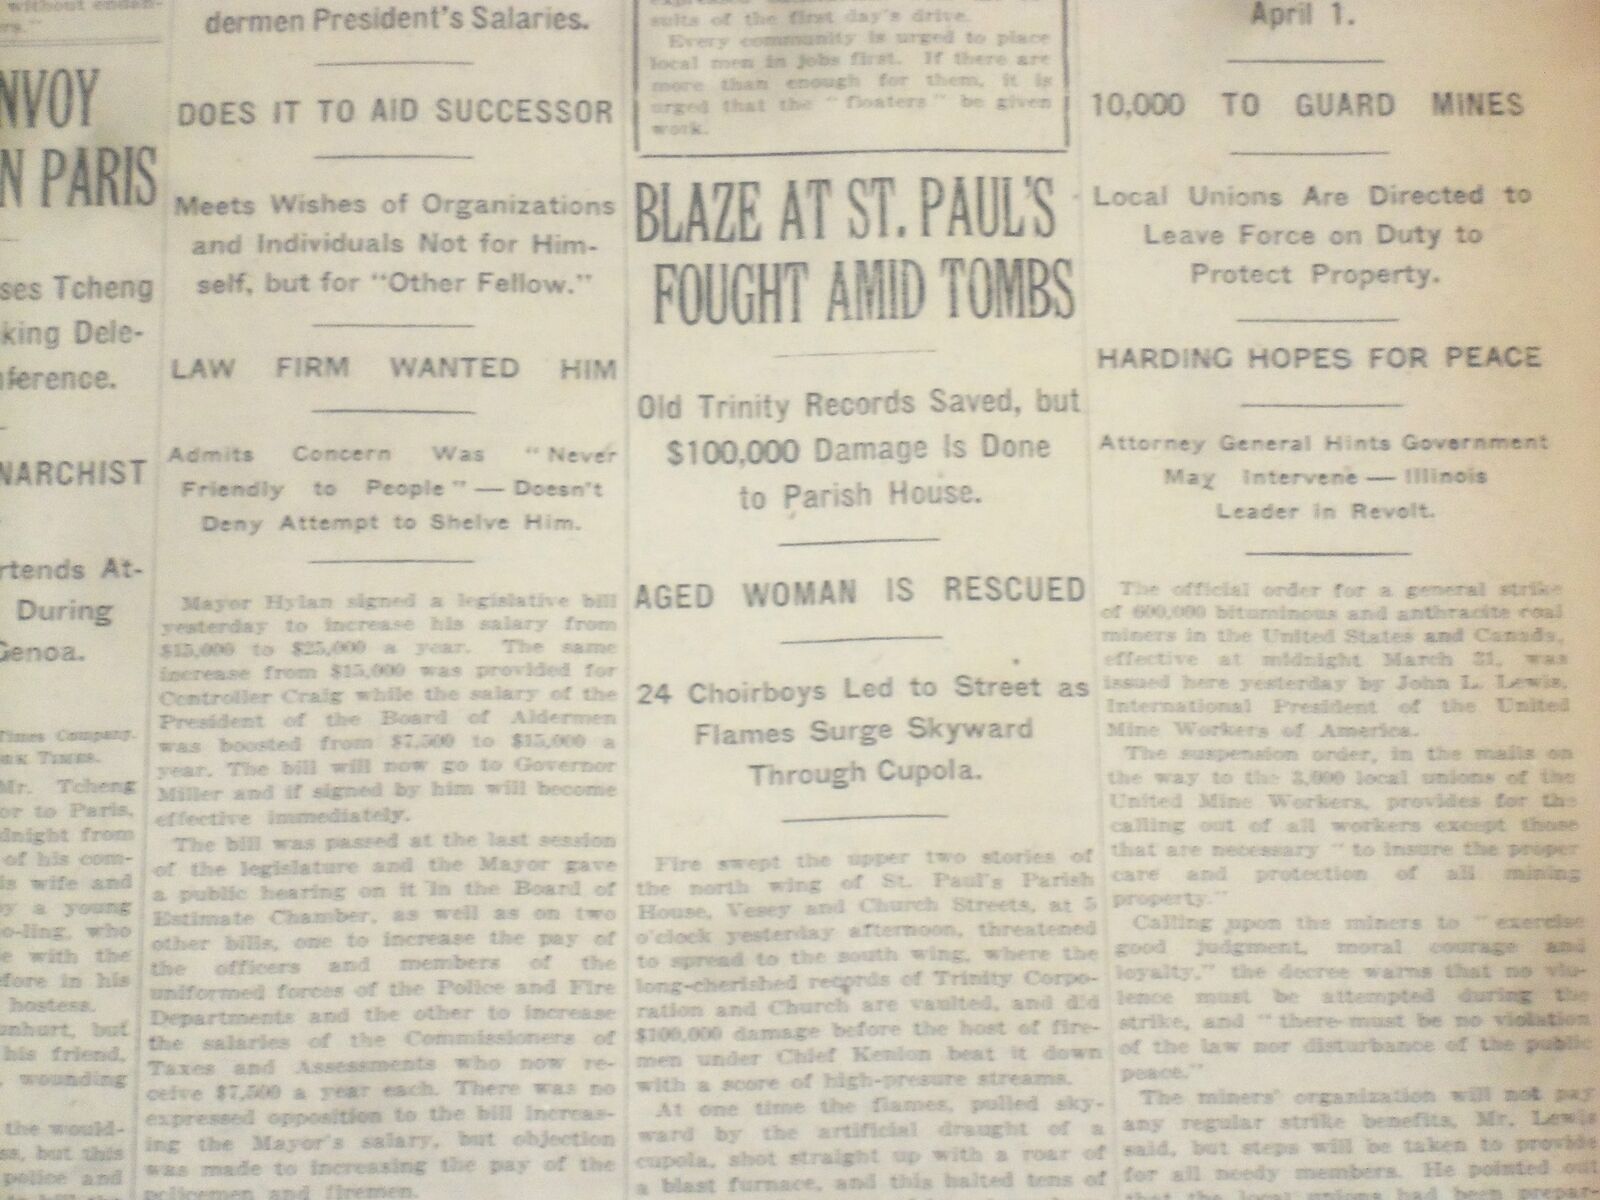 1922 MARCH 22 NEW YORK TIMES - BLAZE AT ST. PAUL'S FOUGHT AMID TOMBS - NT 8328